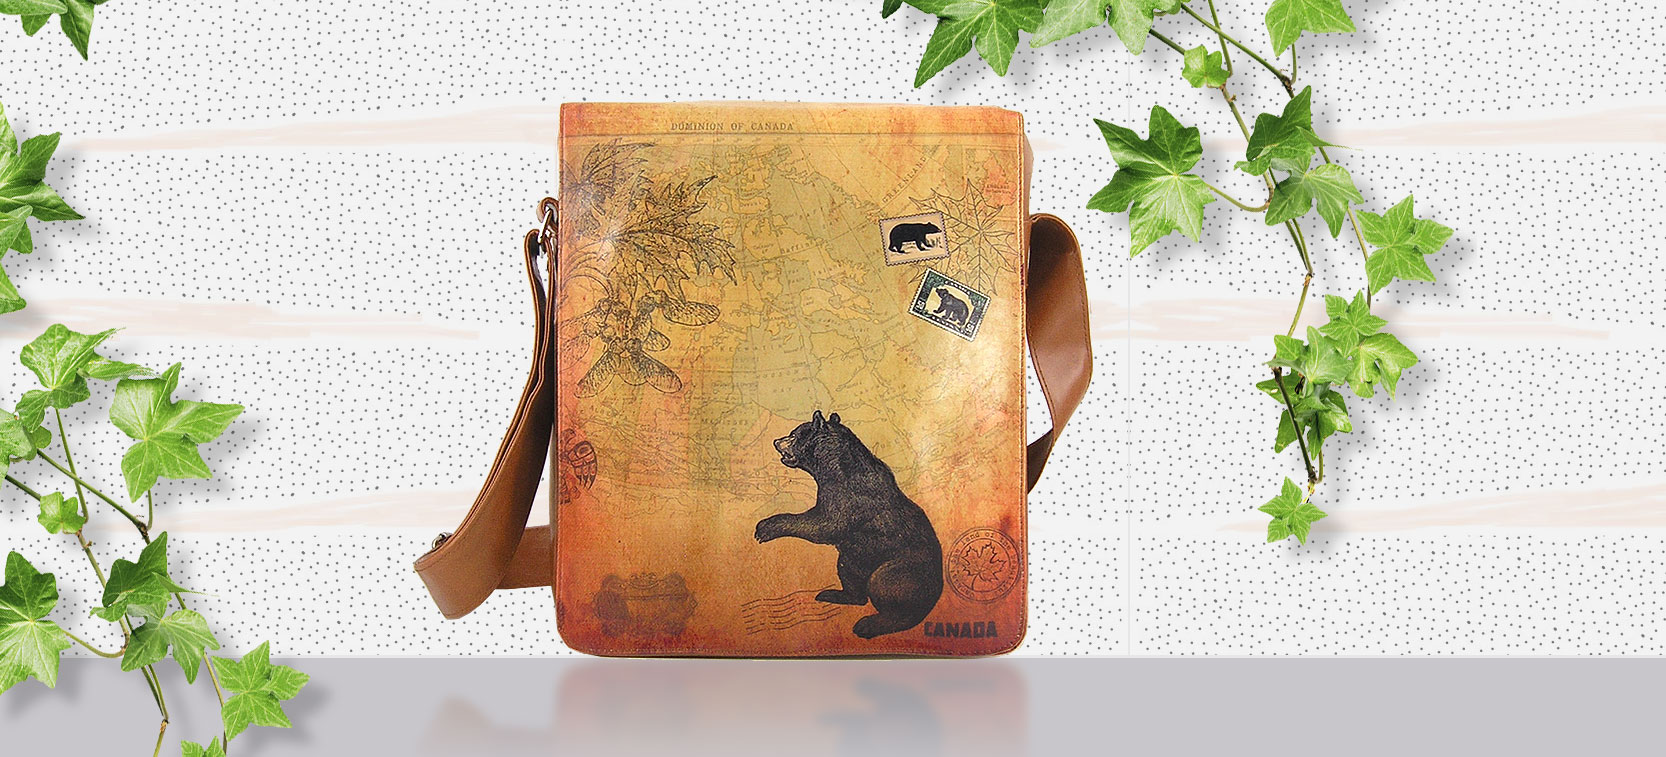 LAVISHY design and wholesale bear themed vegan accessories and gfits to gift shops, boutiques and book shops, souvenir stores in Canada, USA and worldwide.